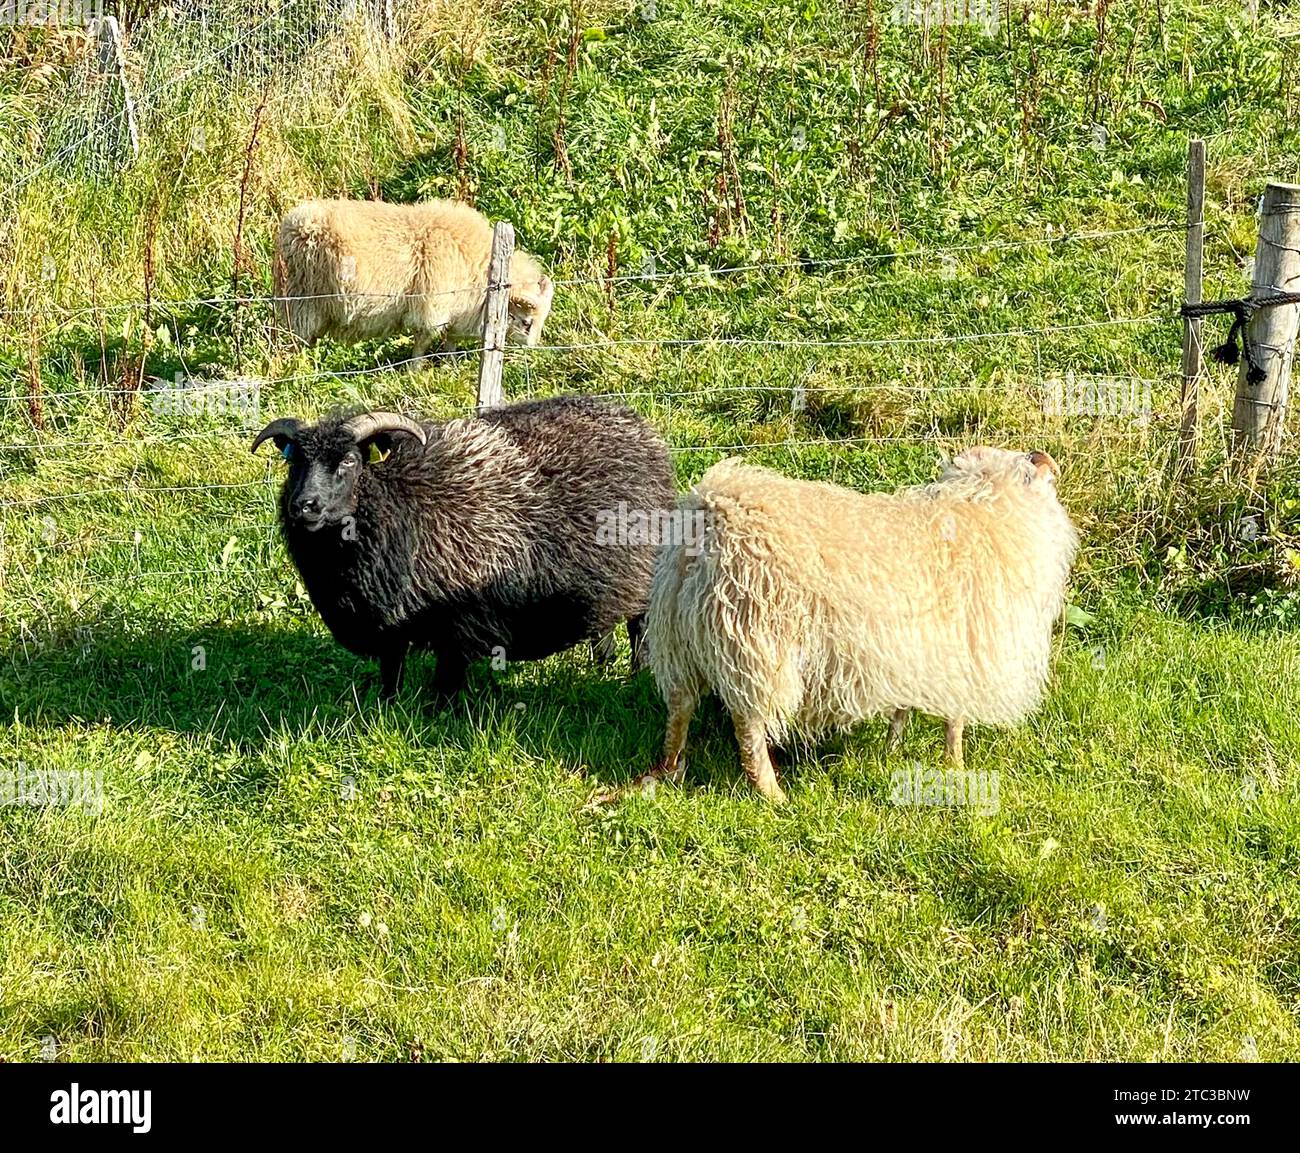 White and Black Sheep Outside the Fence Stock Photo